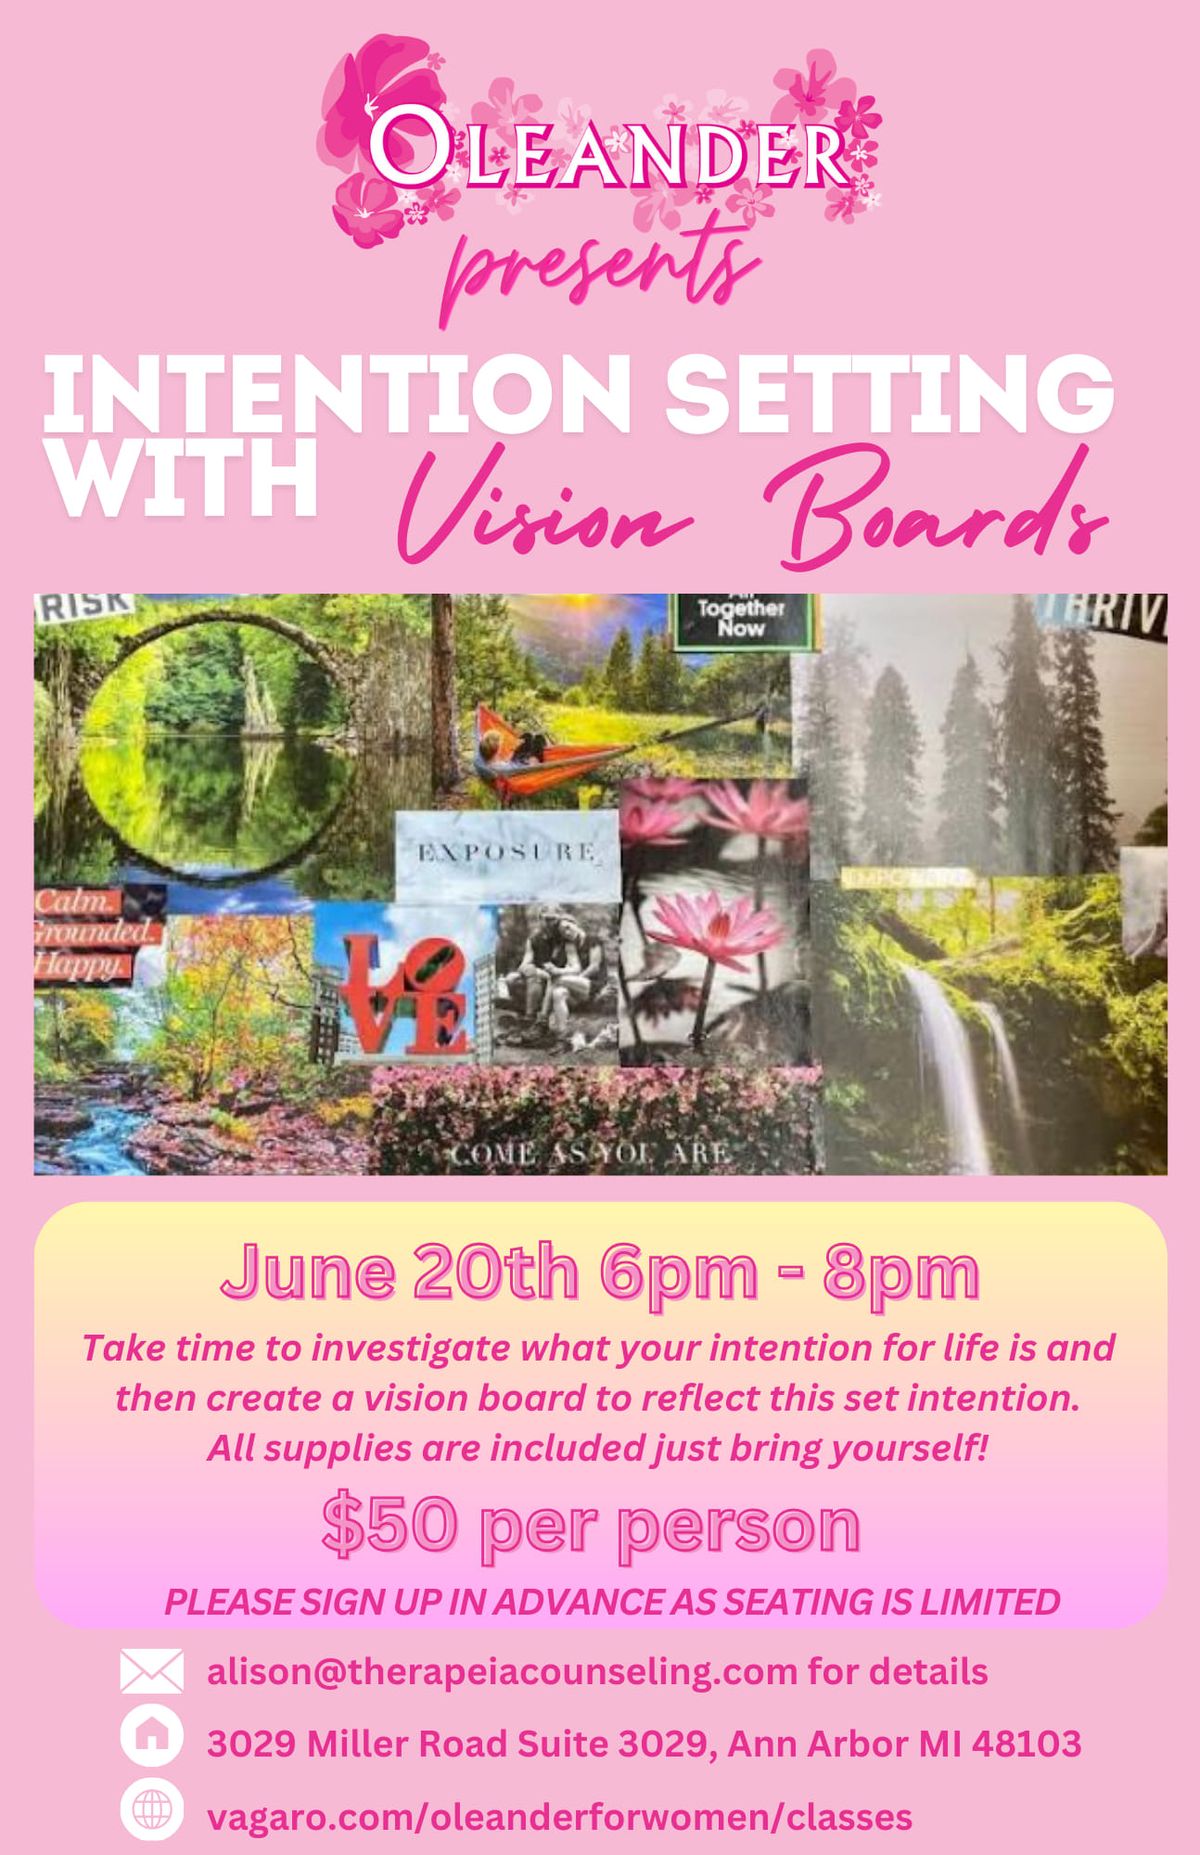 Intention Setting with Vision Boards